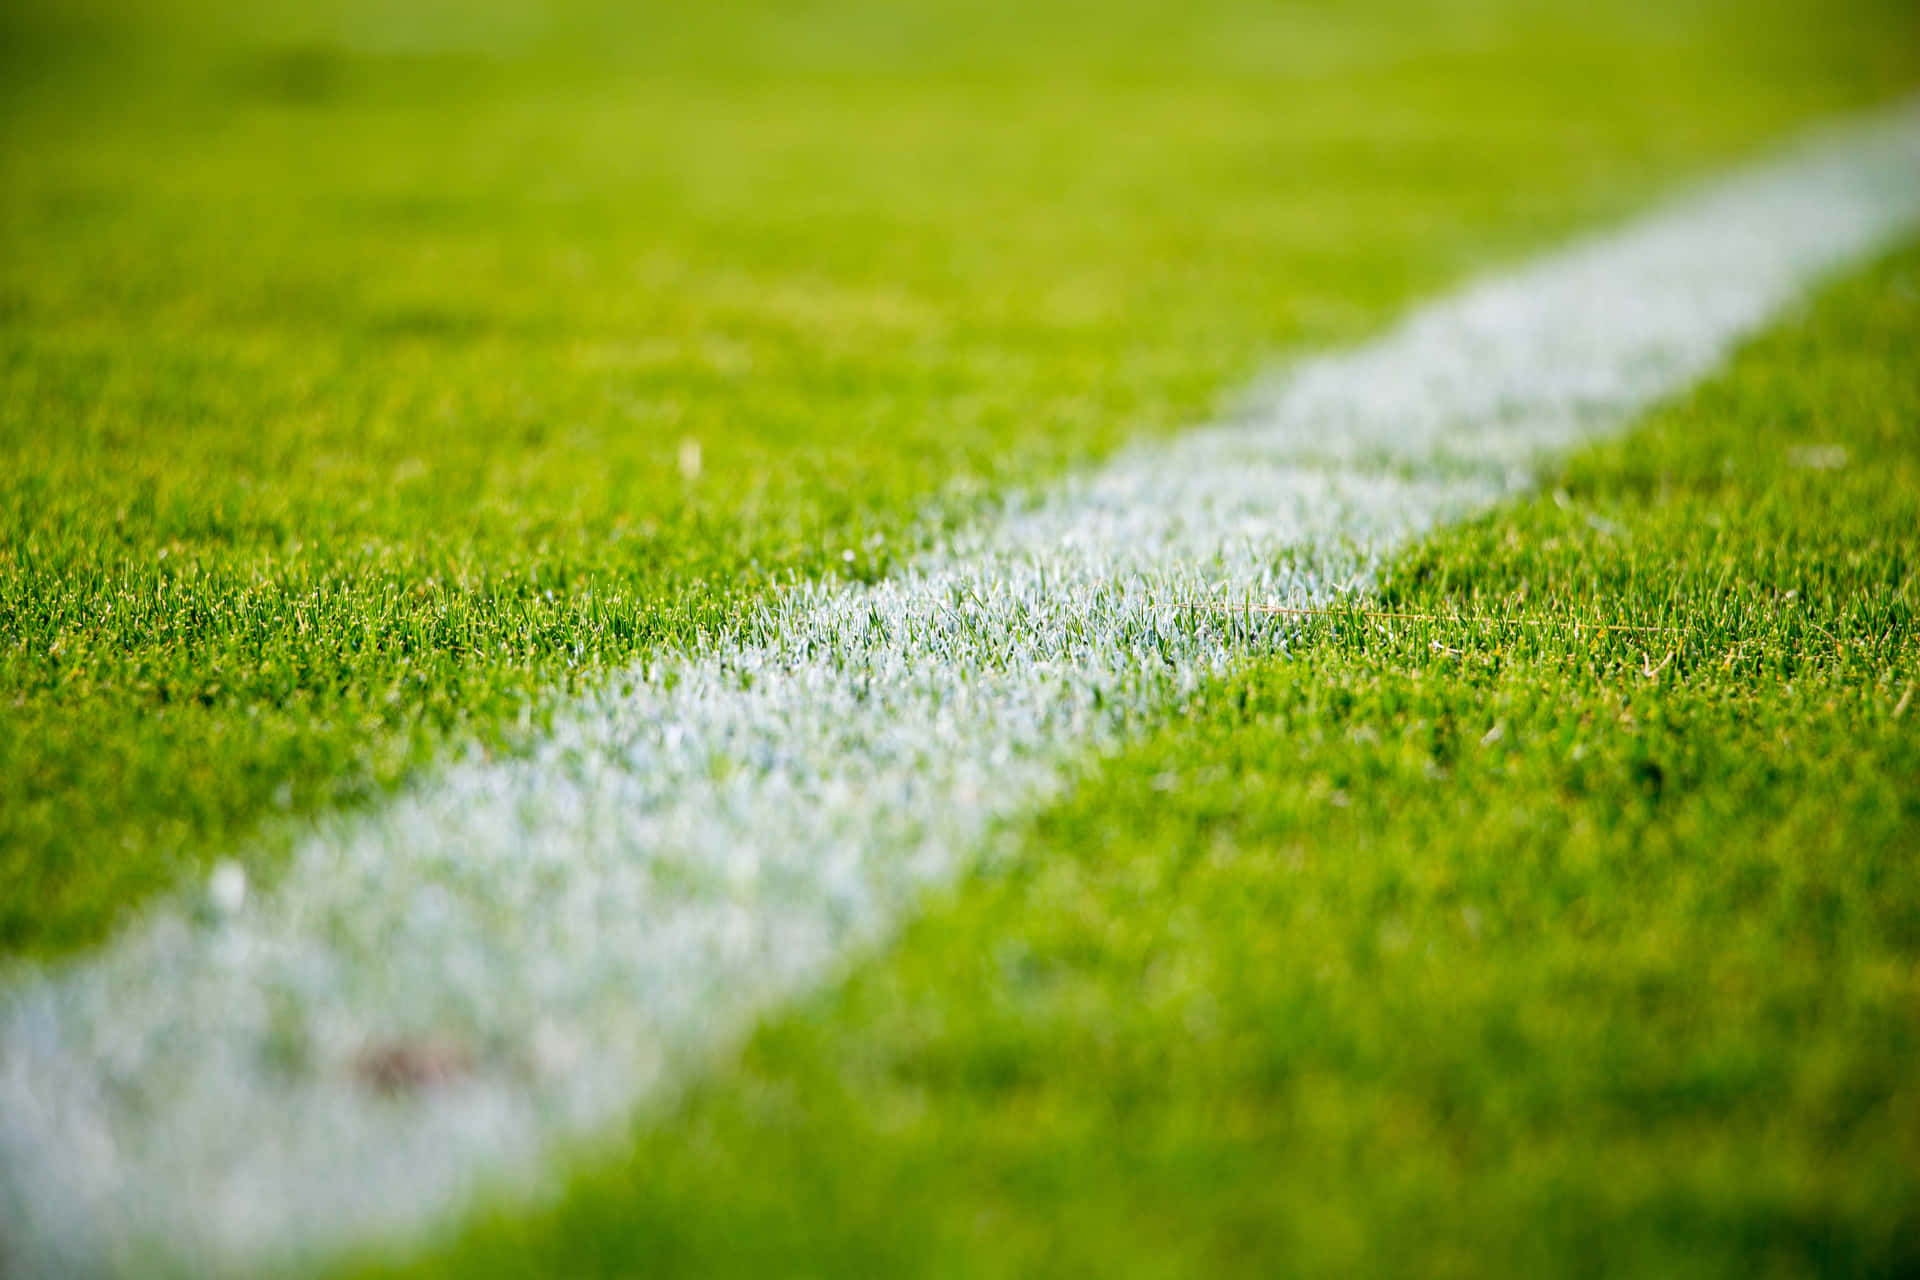 Basic Close Up Of Football Field Line Picture